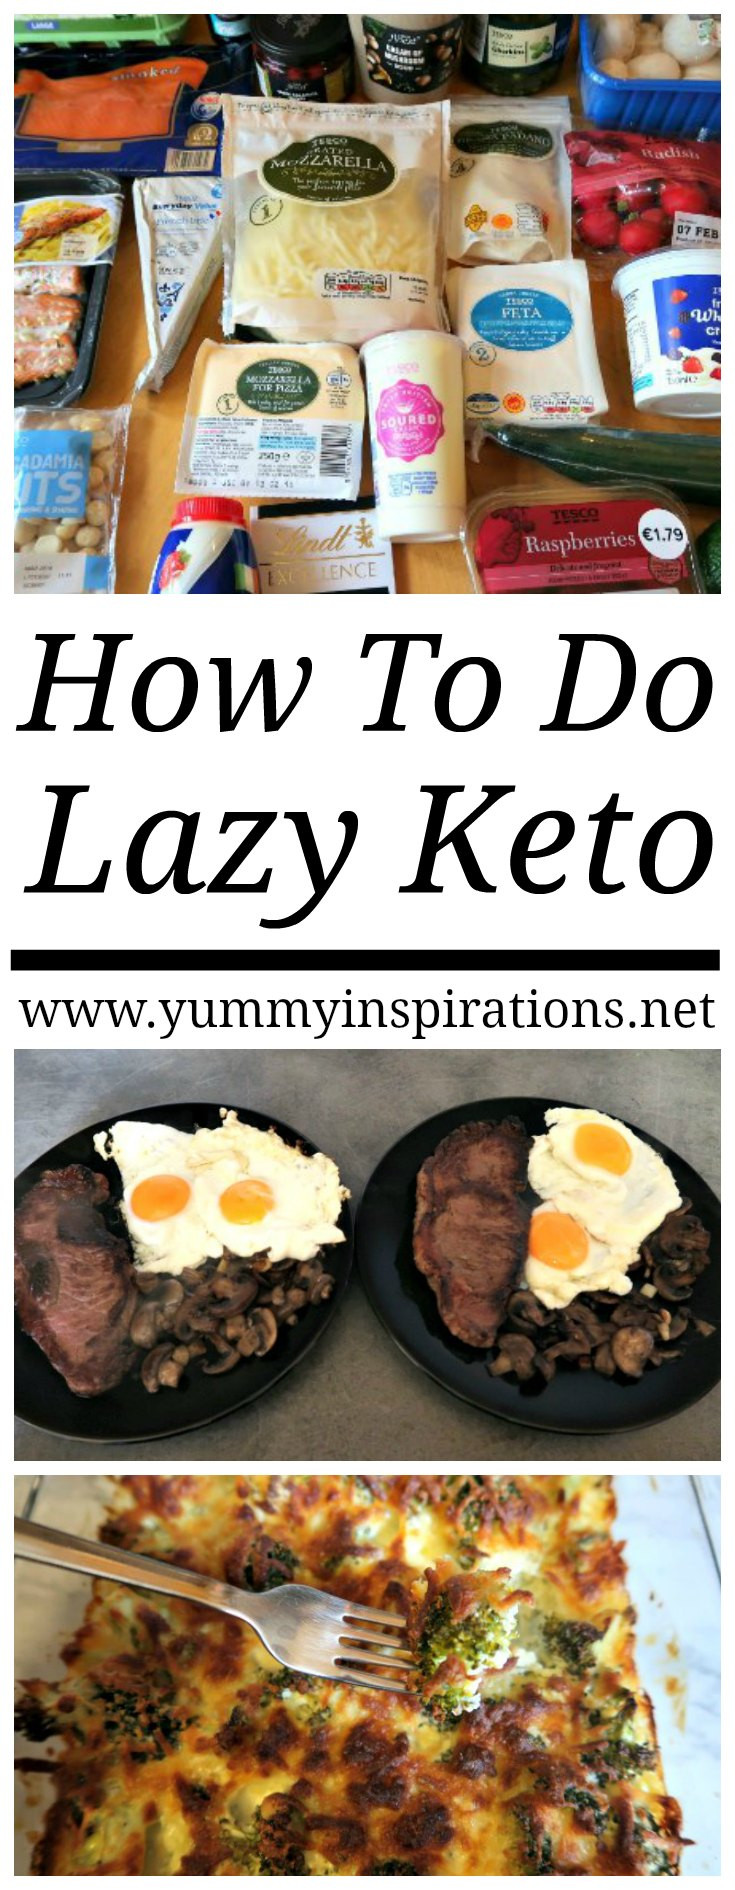 Lazy Keto Diet For Beginners
 How To Do Lazy Keto What is Lazy Keto Cooking Lazy Keto